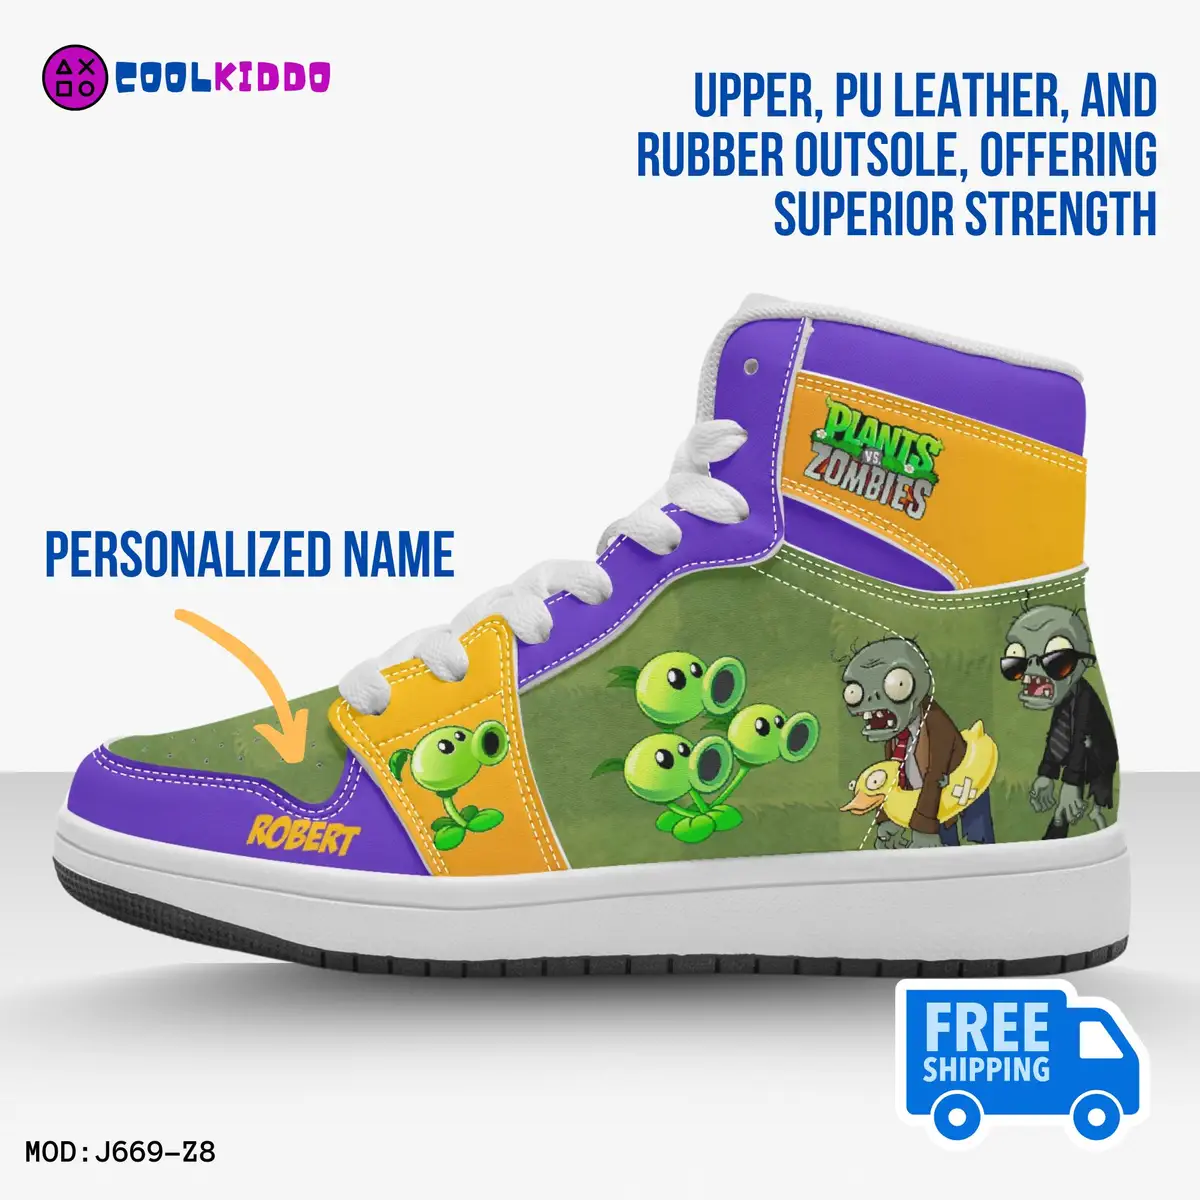 Personalized Plants vs Zombies Characters High-Top Leather Sneakers – Jordans Style Shoes Cool Kiddo 12